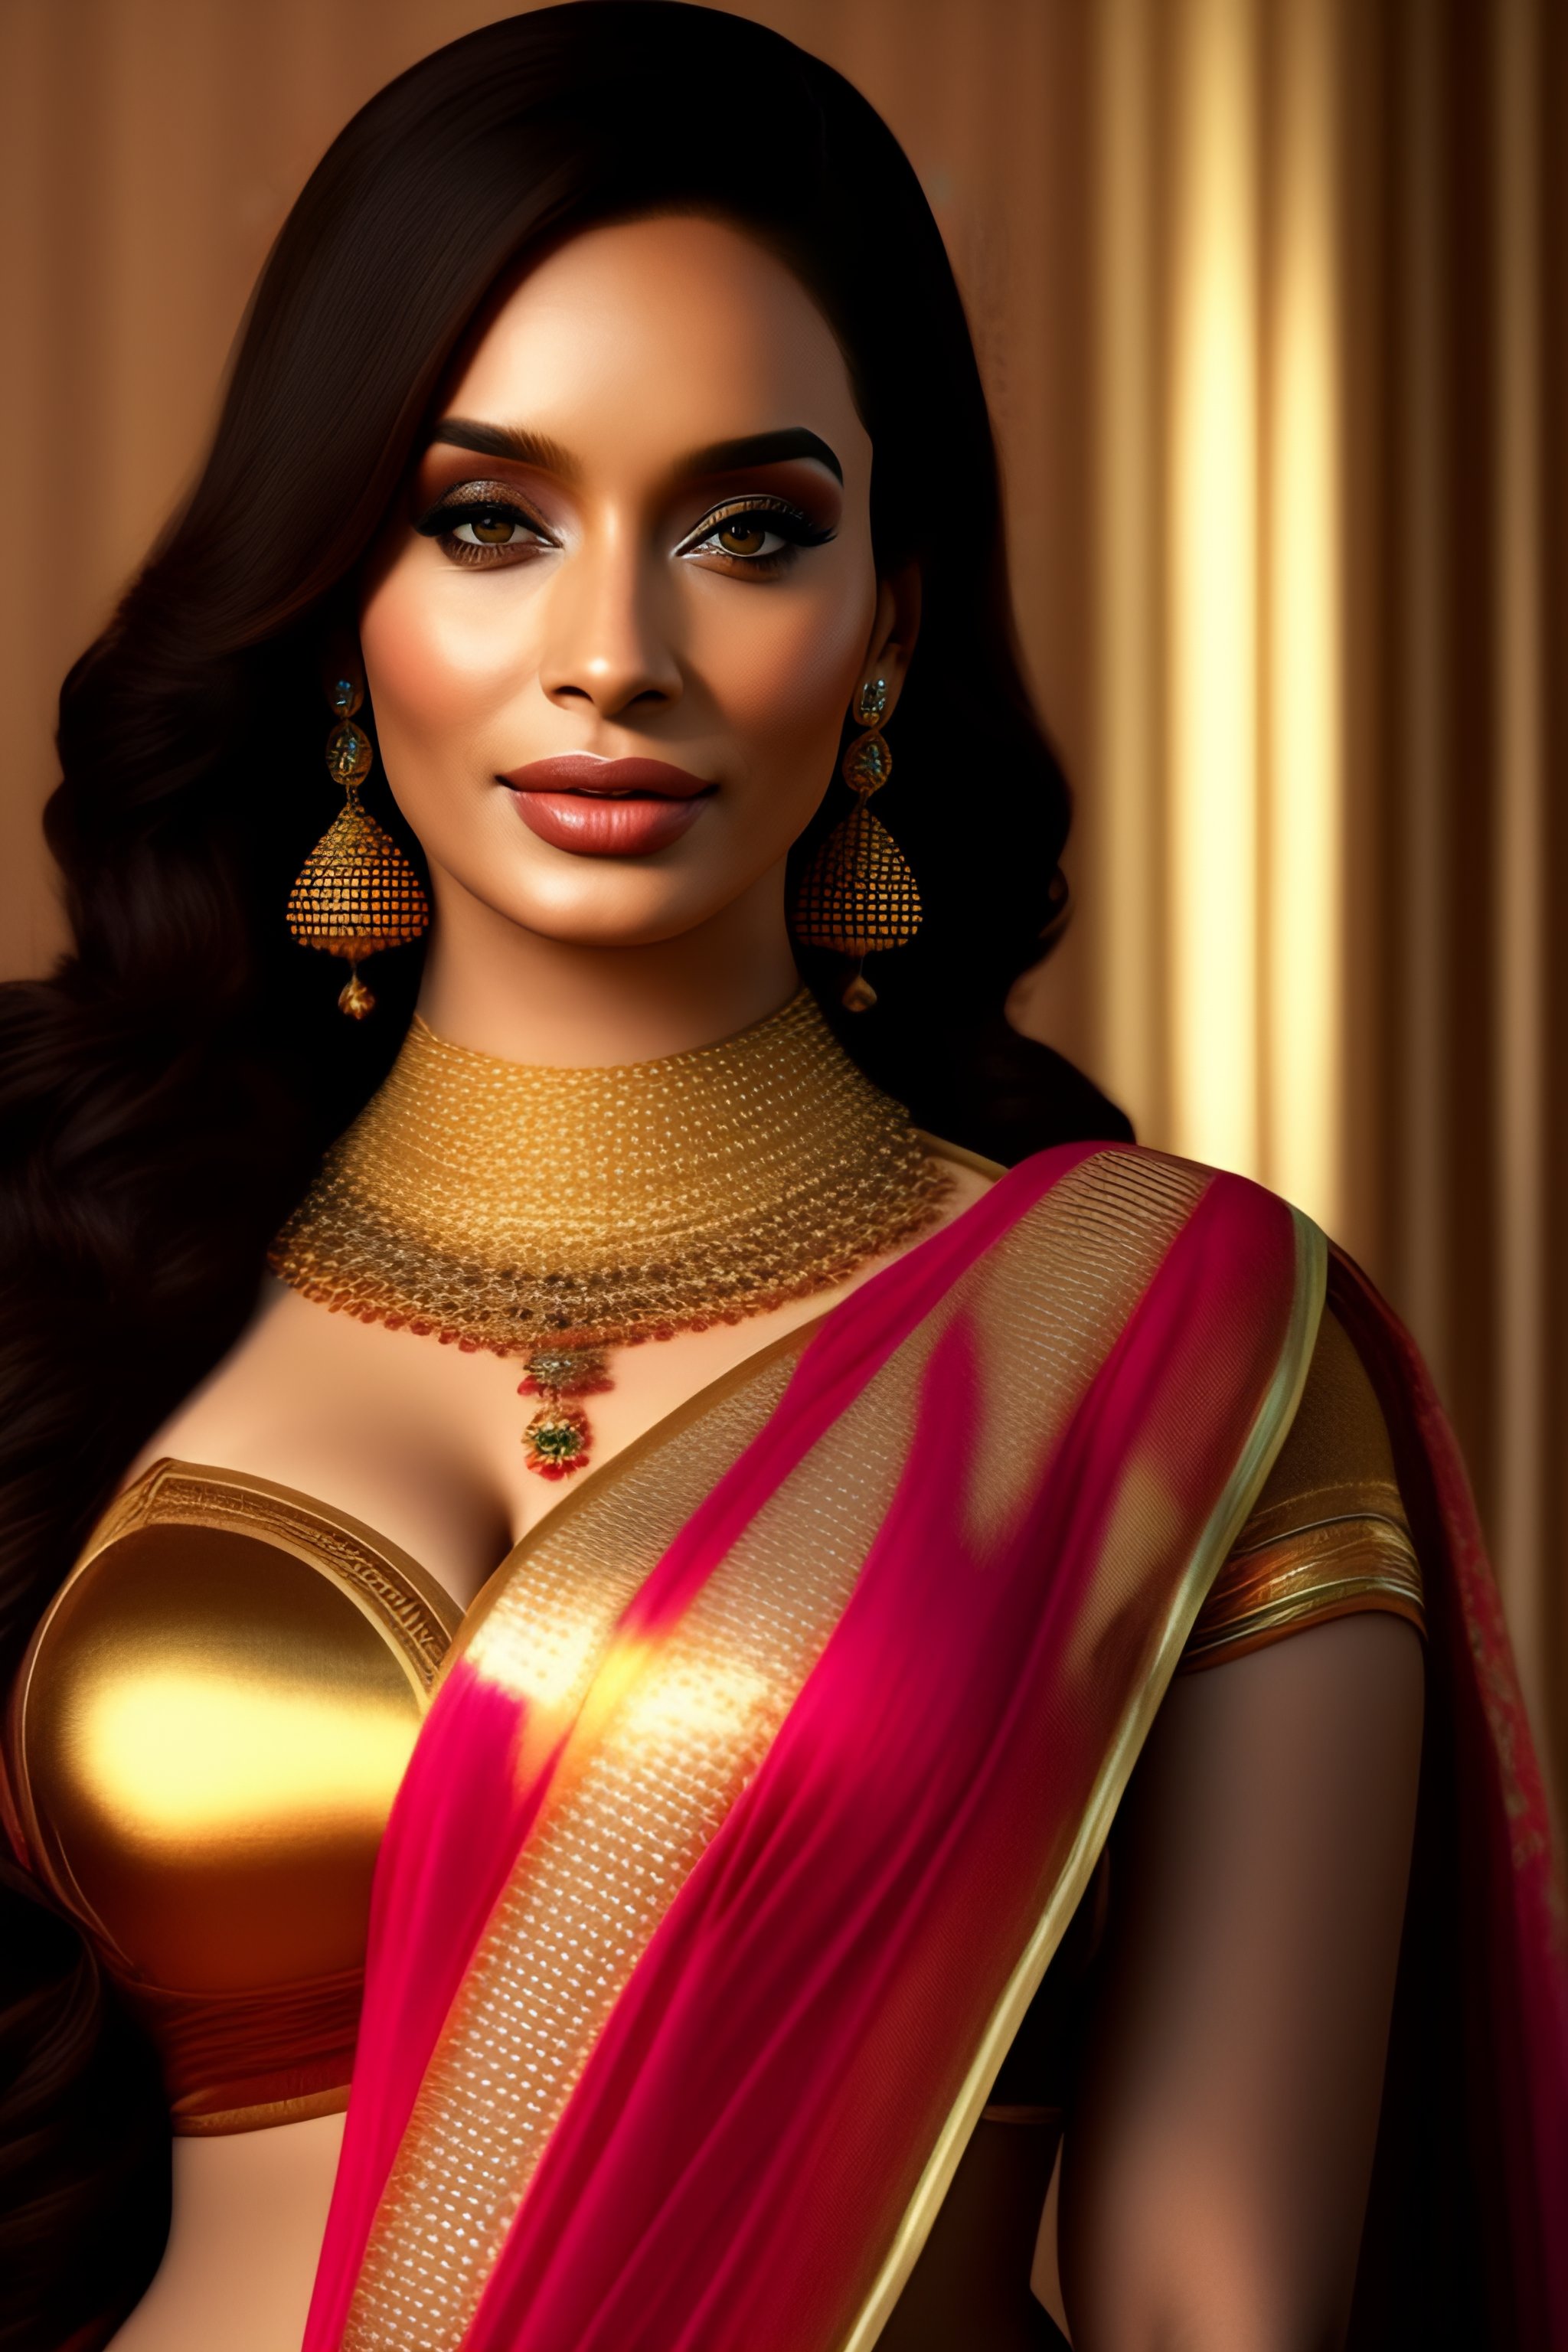 Lexica - Young north indian girl in a saree, christina hendricks, massive  downblouse, fit body, wearing saree, wearing kebama, vogue photoshoot,  maxi